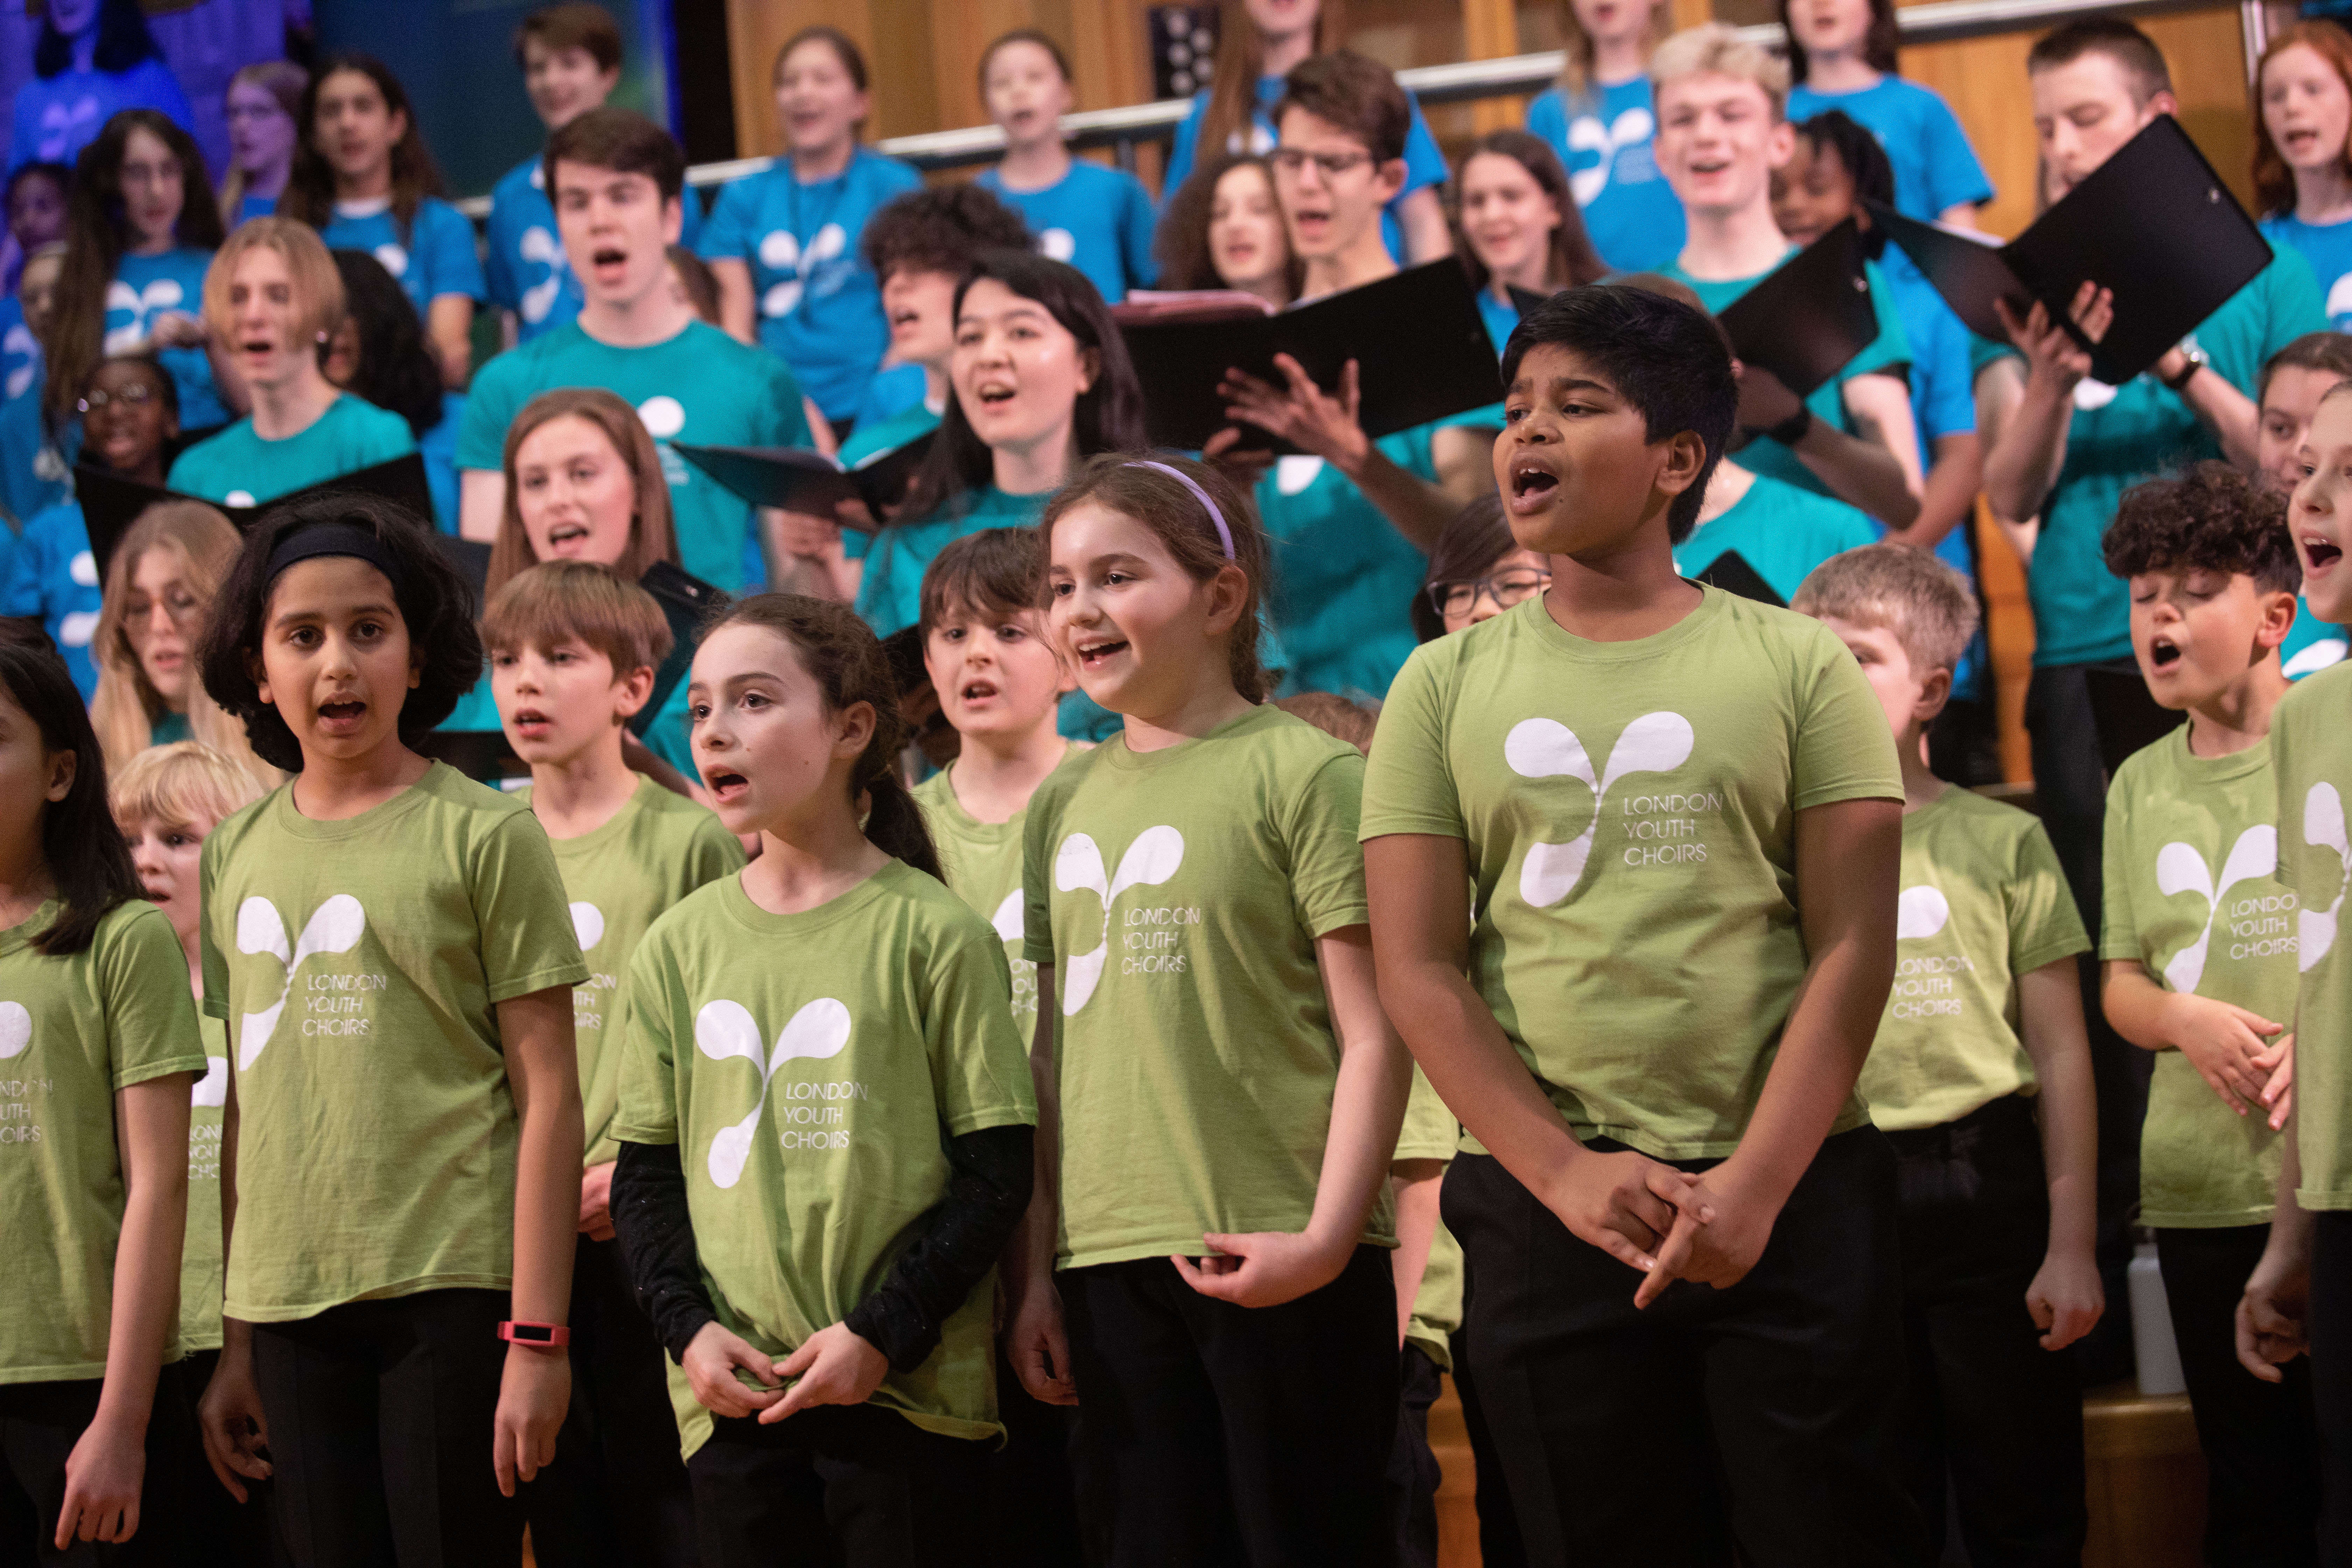 London Youth Choirs singers